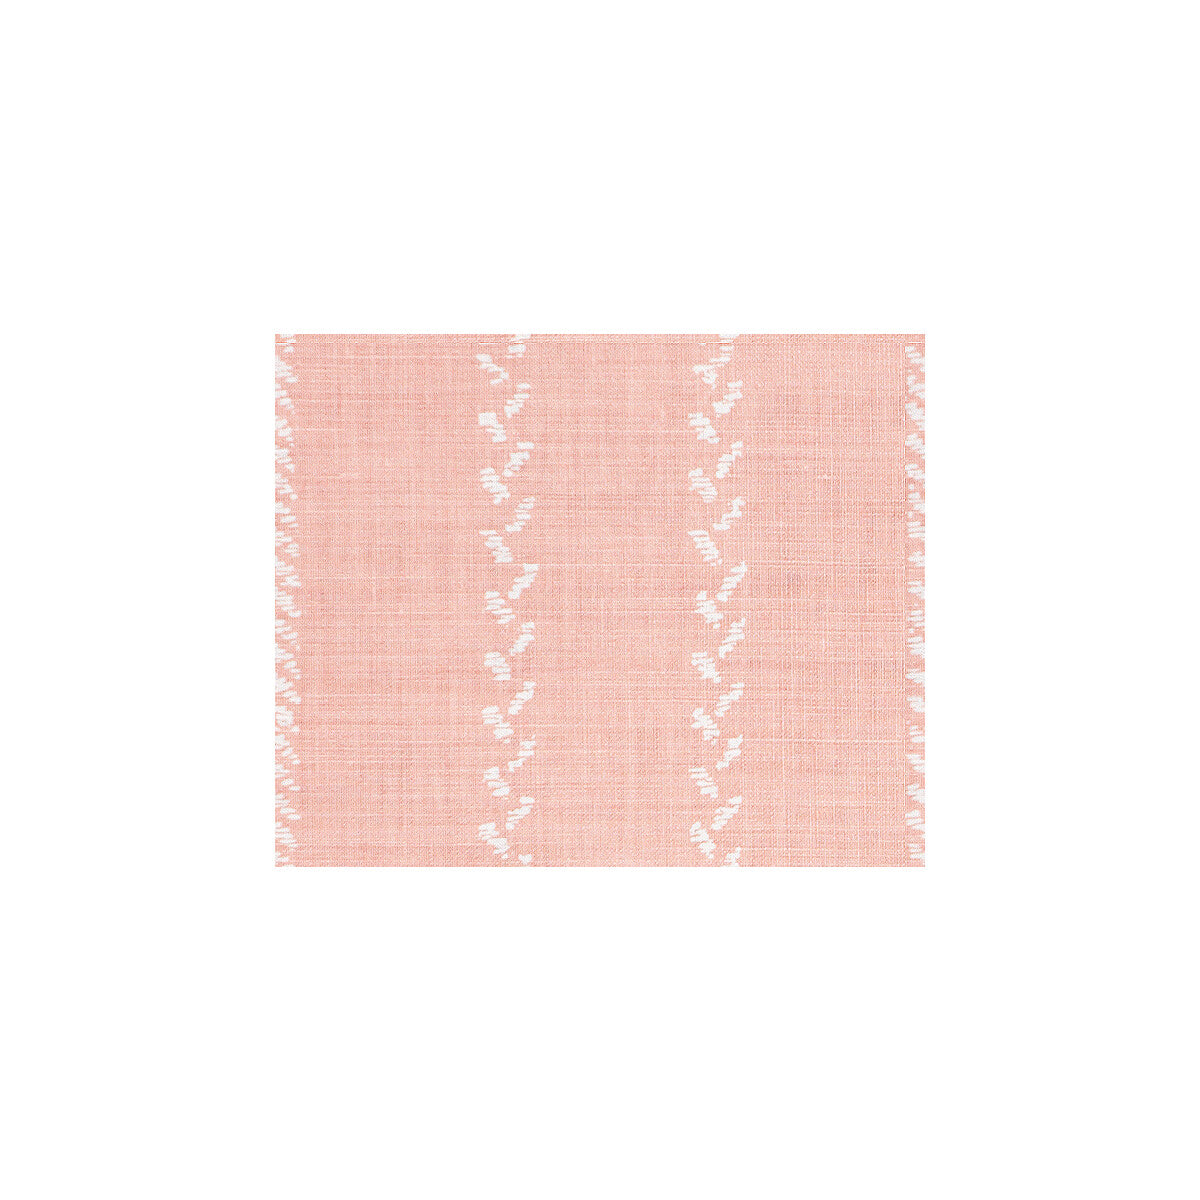 Pelham Stripe fabric in pink color - pattern BFC-3507.17.0 - by Lee Jofa in the Blithfield collection